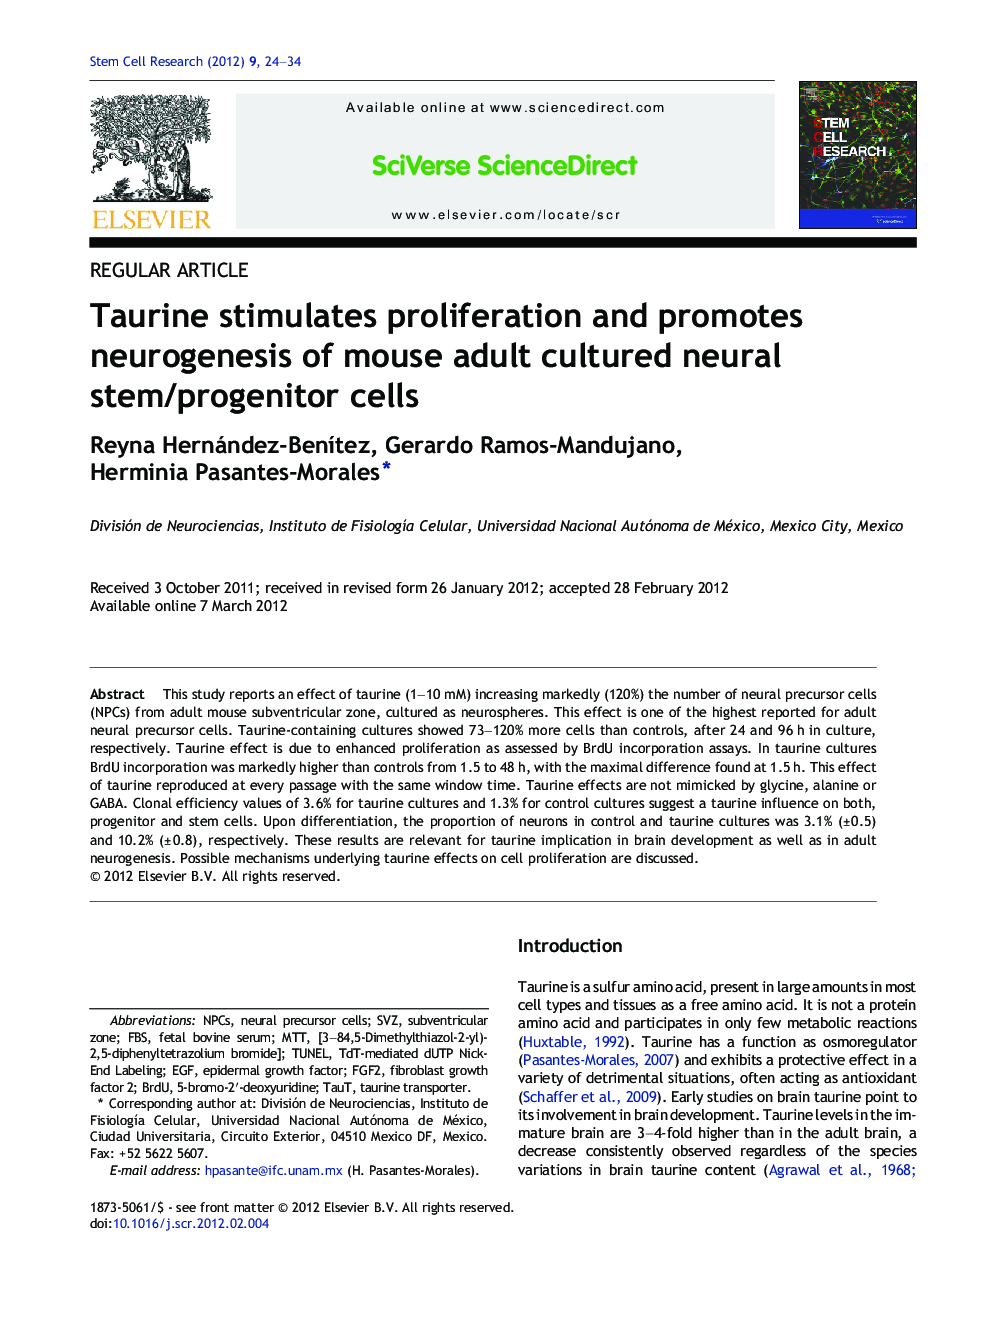 Taurine stimulates proliferation and promotes neurogenesis of mouse adult cultured neural stem/progenitor cells